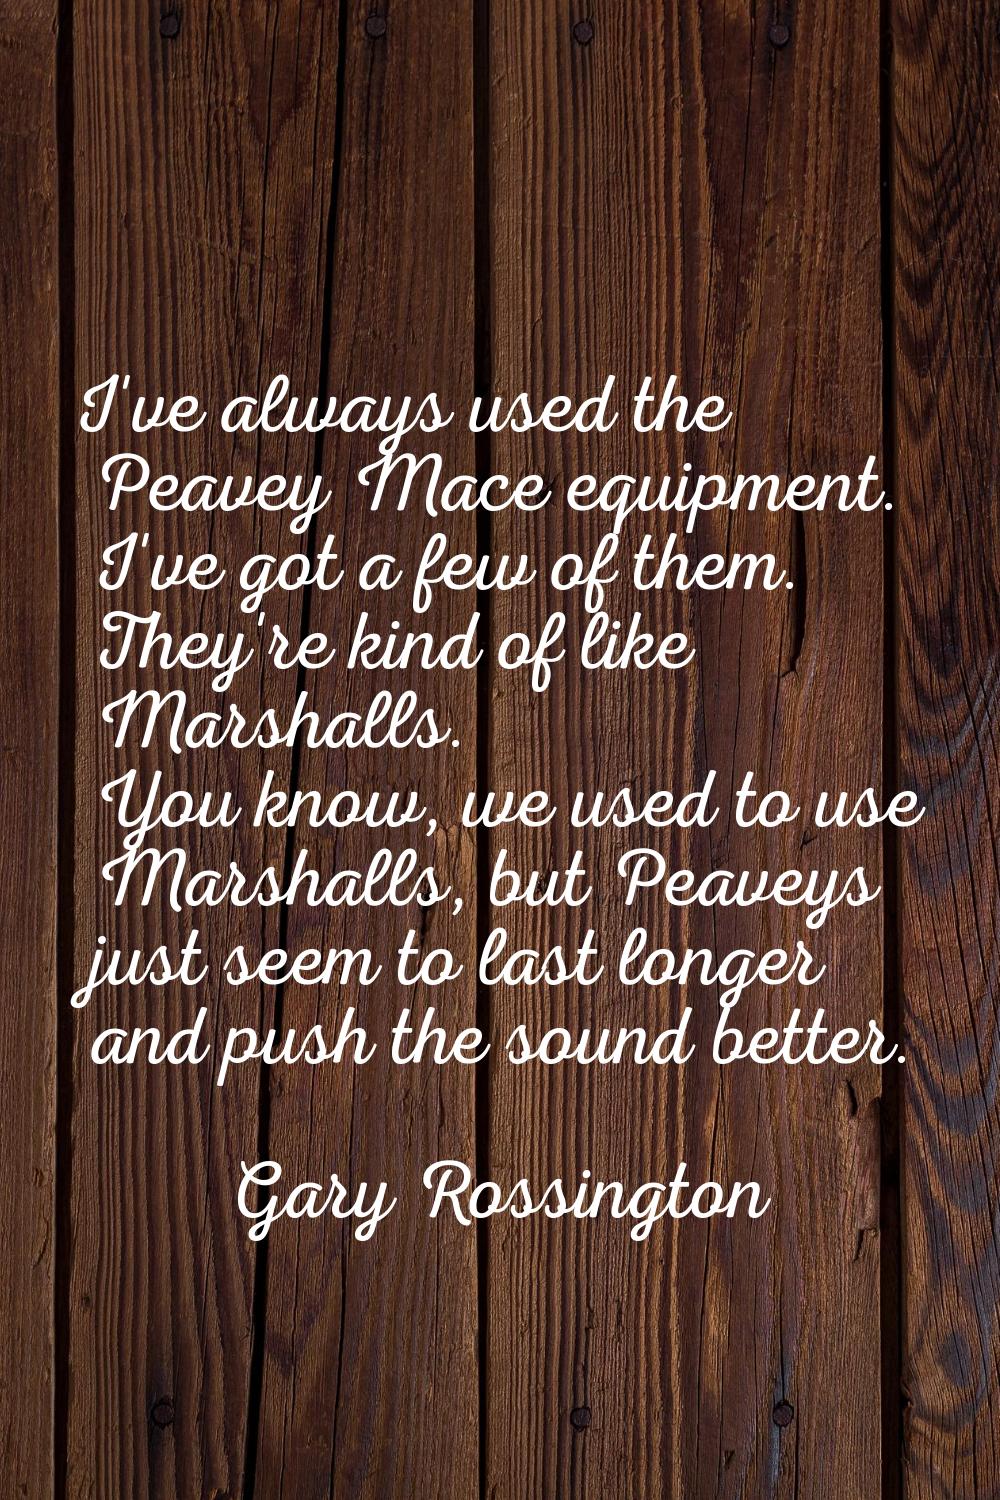 I've always used the Peavey Mace equipment. I've got a few of them. They're kind of like Marshalls.